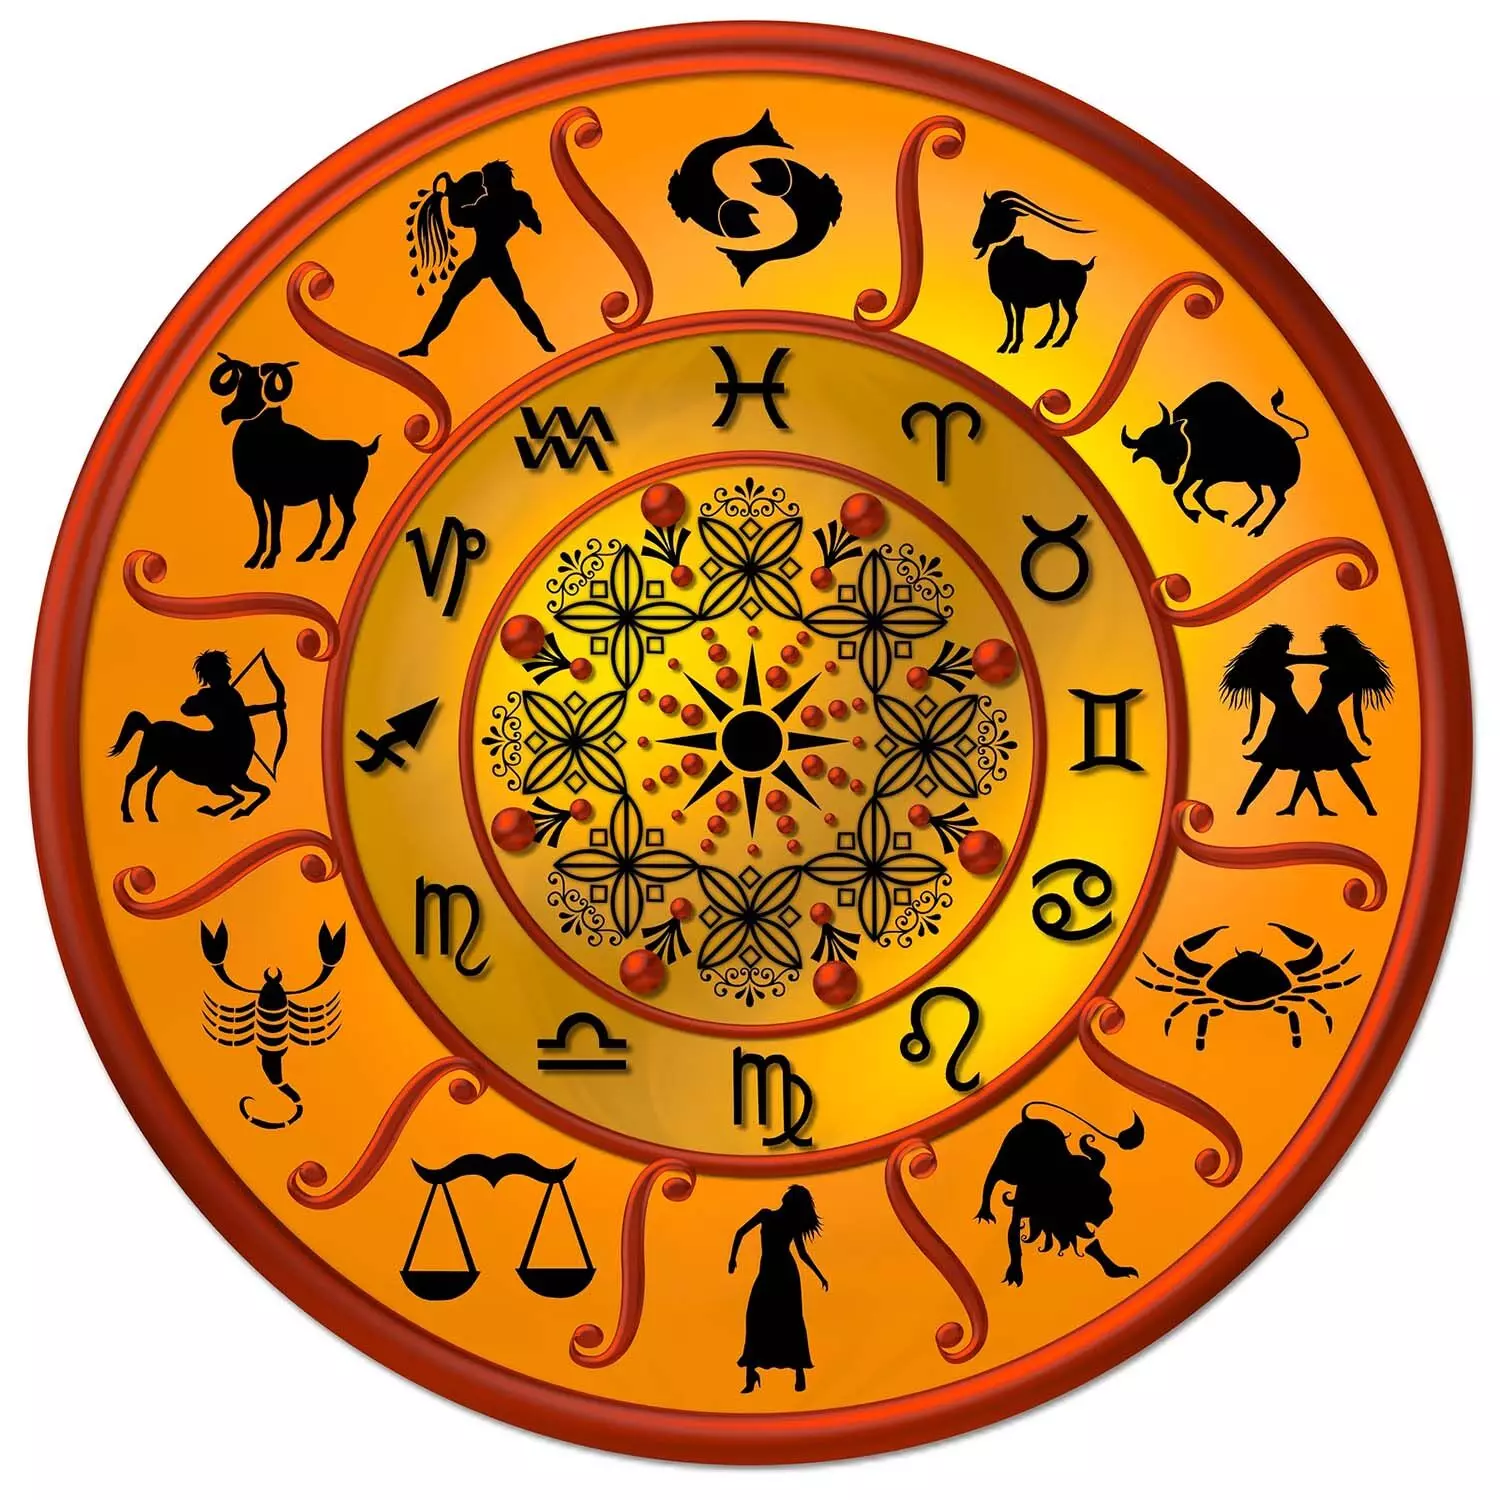 14 June – Know your todays horoscope